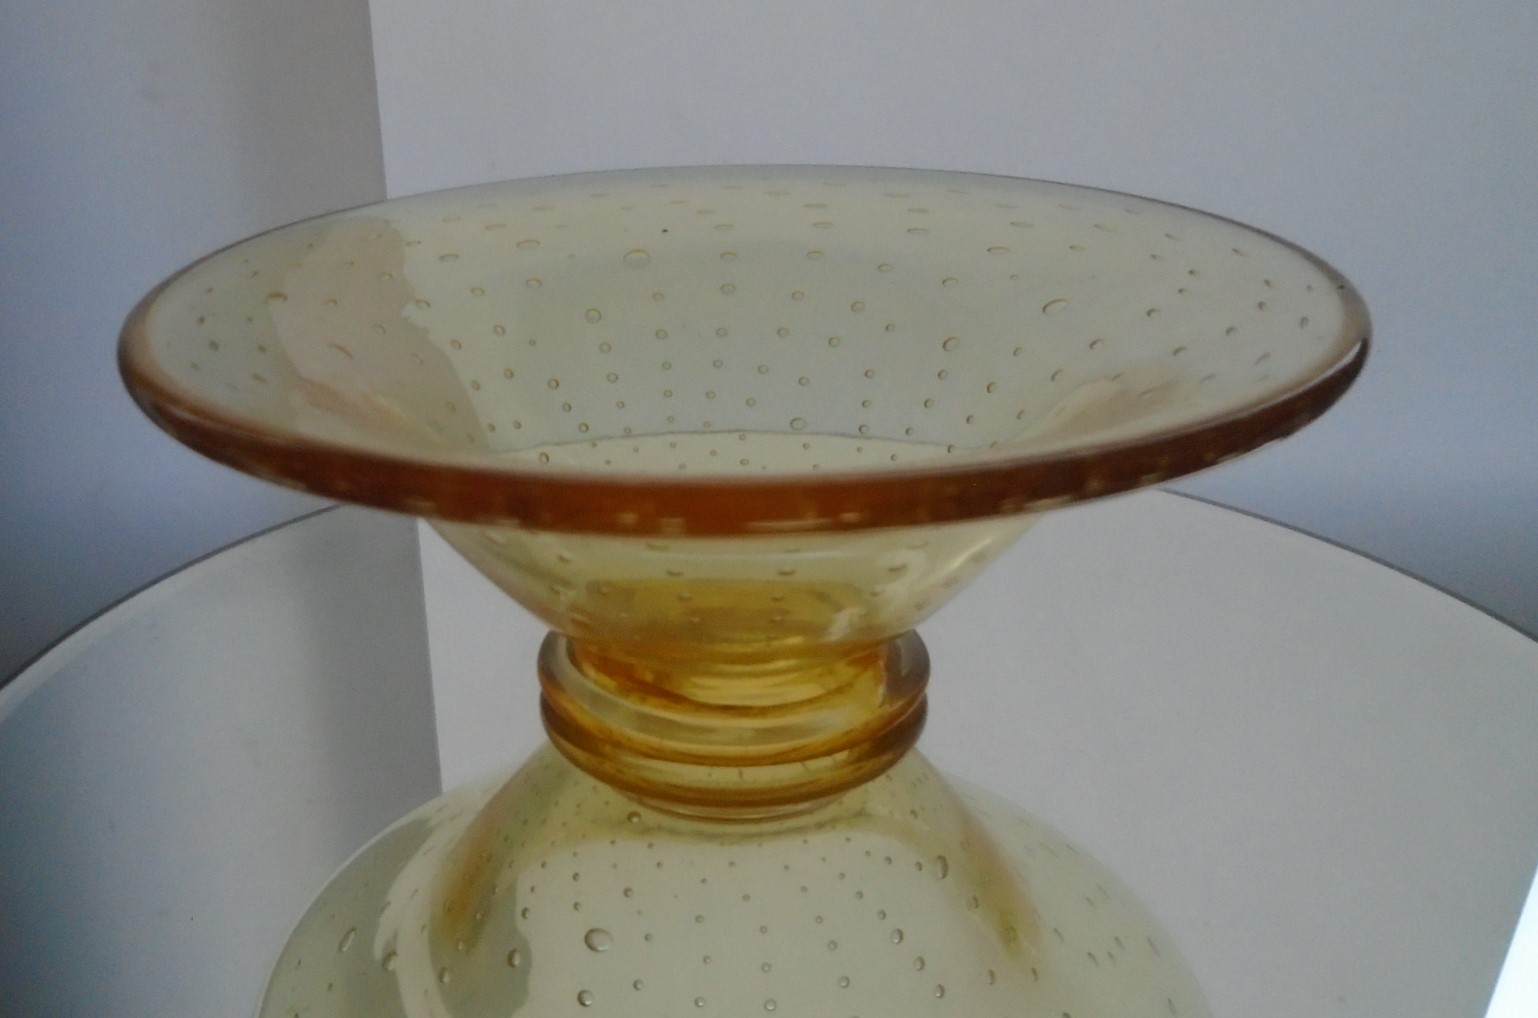 1940s VINTAGE WEBB FOOTED SWEET BOWL with controlled bubbles in amber glass. It measures 16.4cms in diameter and stands approx. 6.4cms in height.